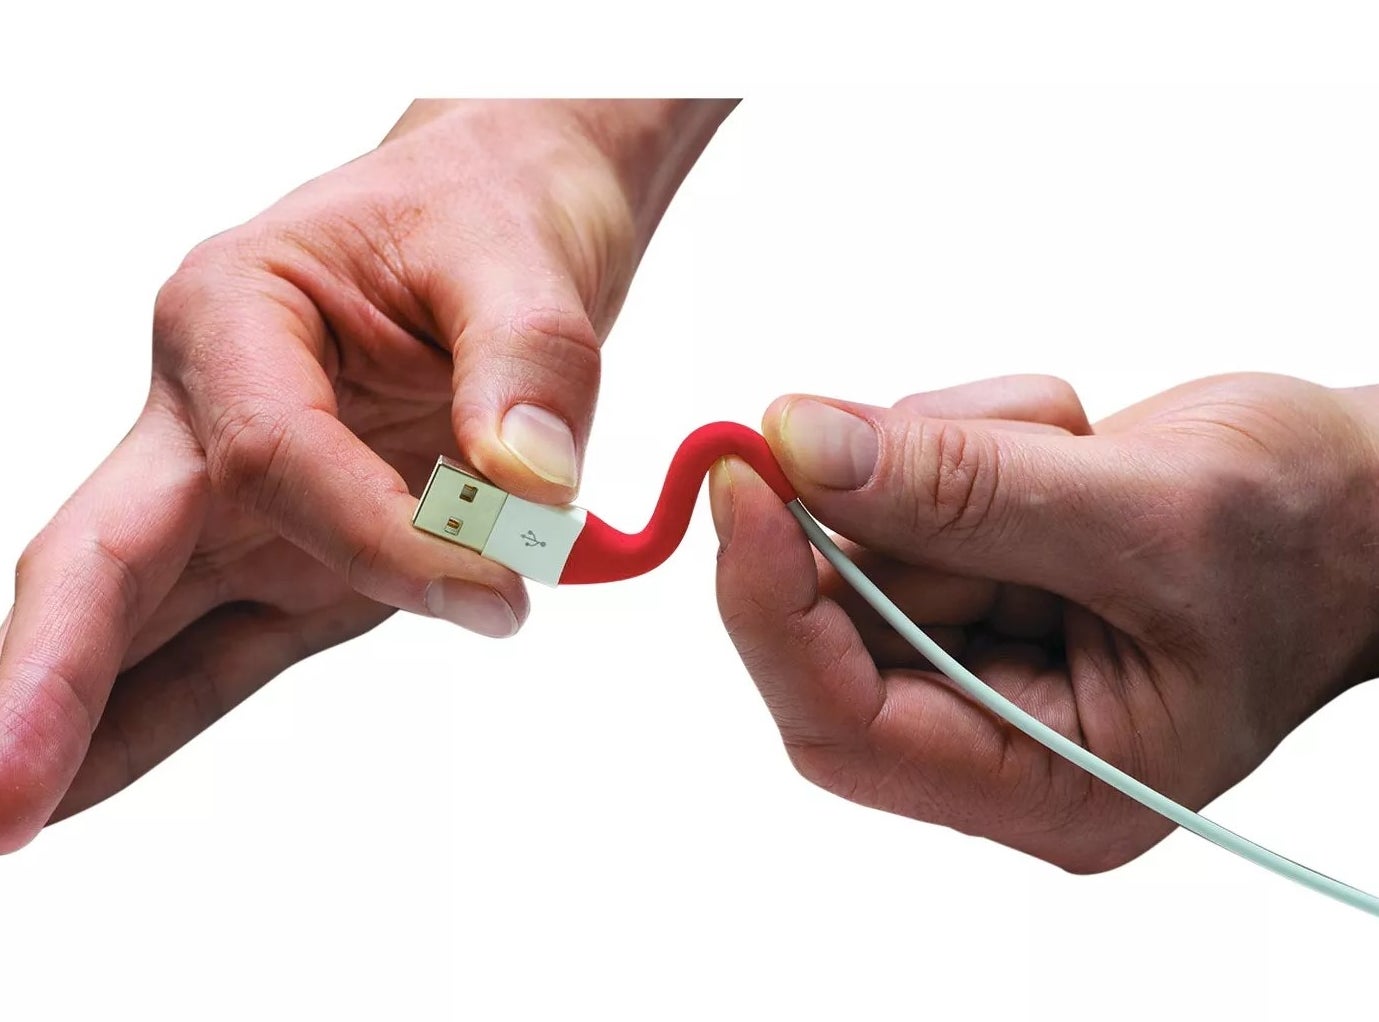 The glue used to mend a torn USB charger